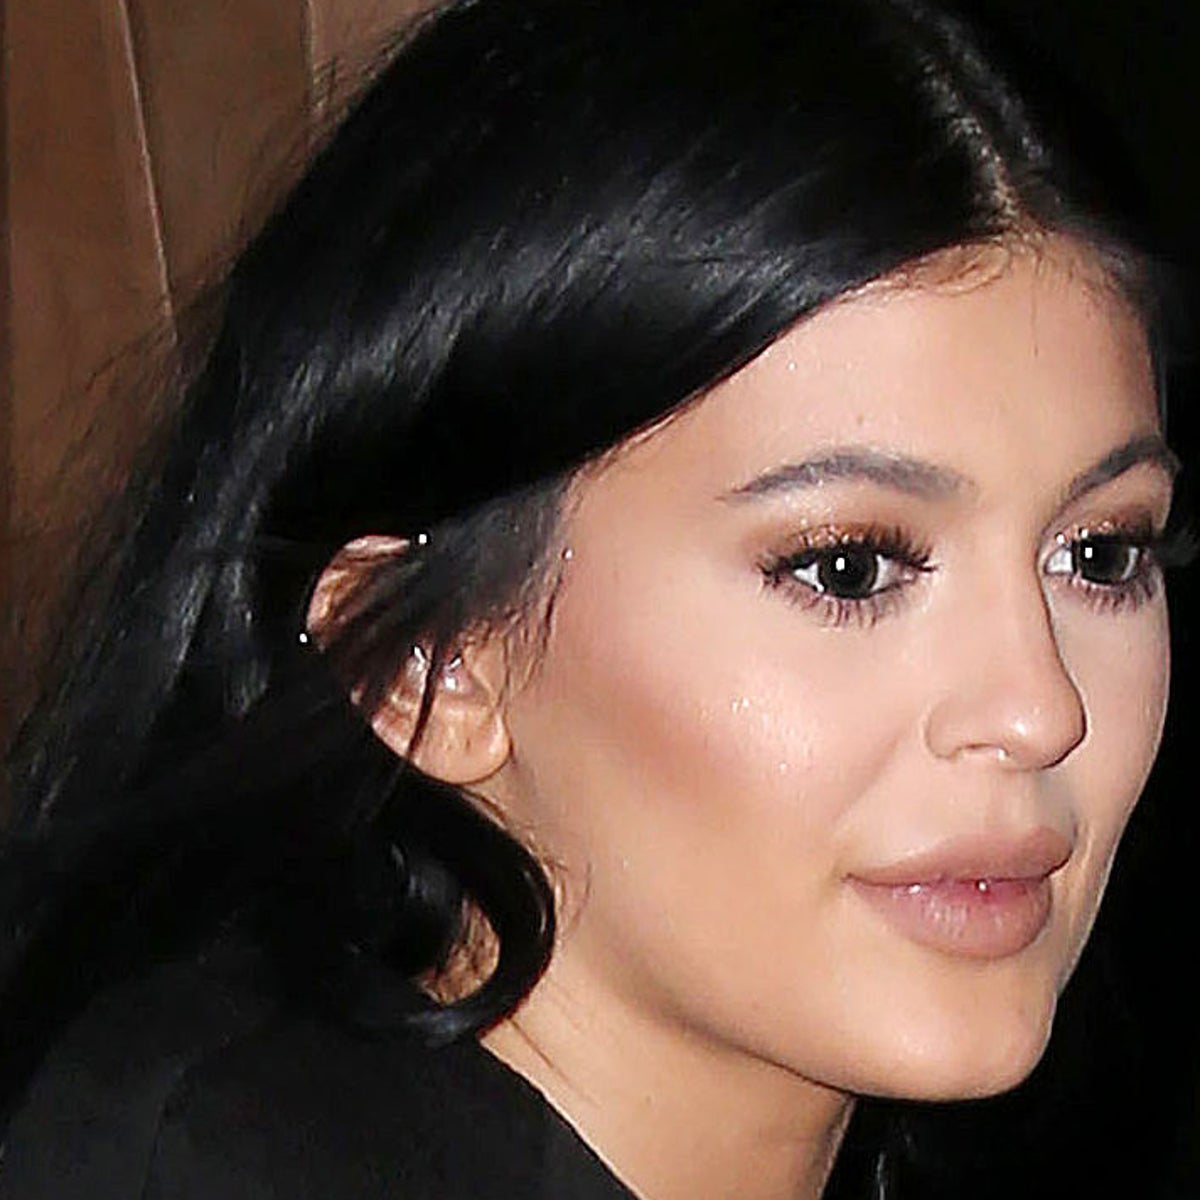 Kylie Jenner Lip Fillers: Experts Explain The Medical And Ethical Minefield  Around Injecting A 17-Year-Old Girl | The Independent | The Independent